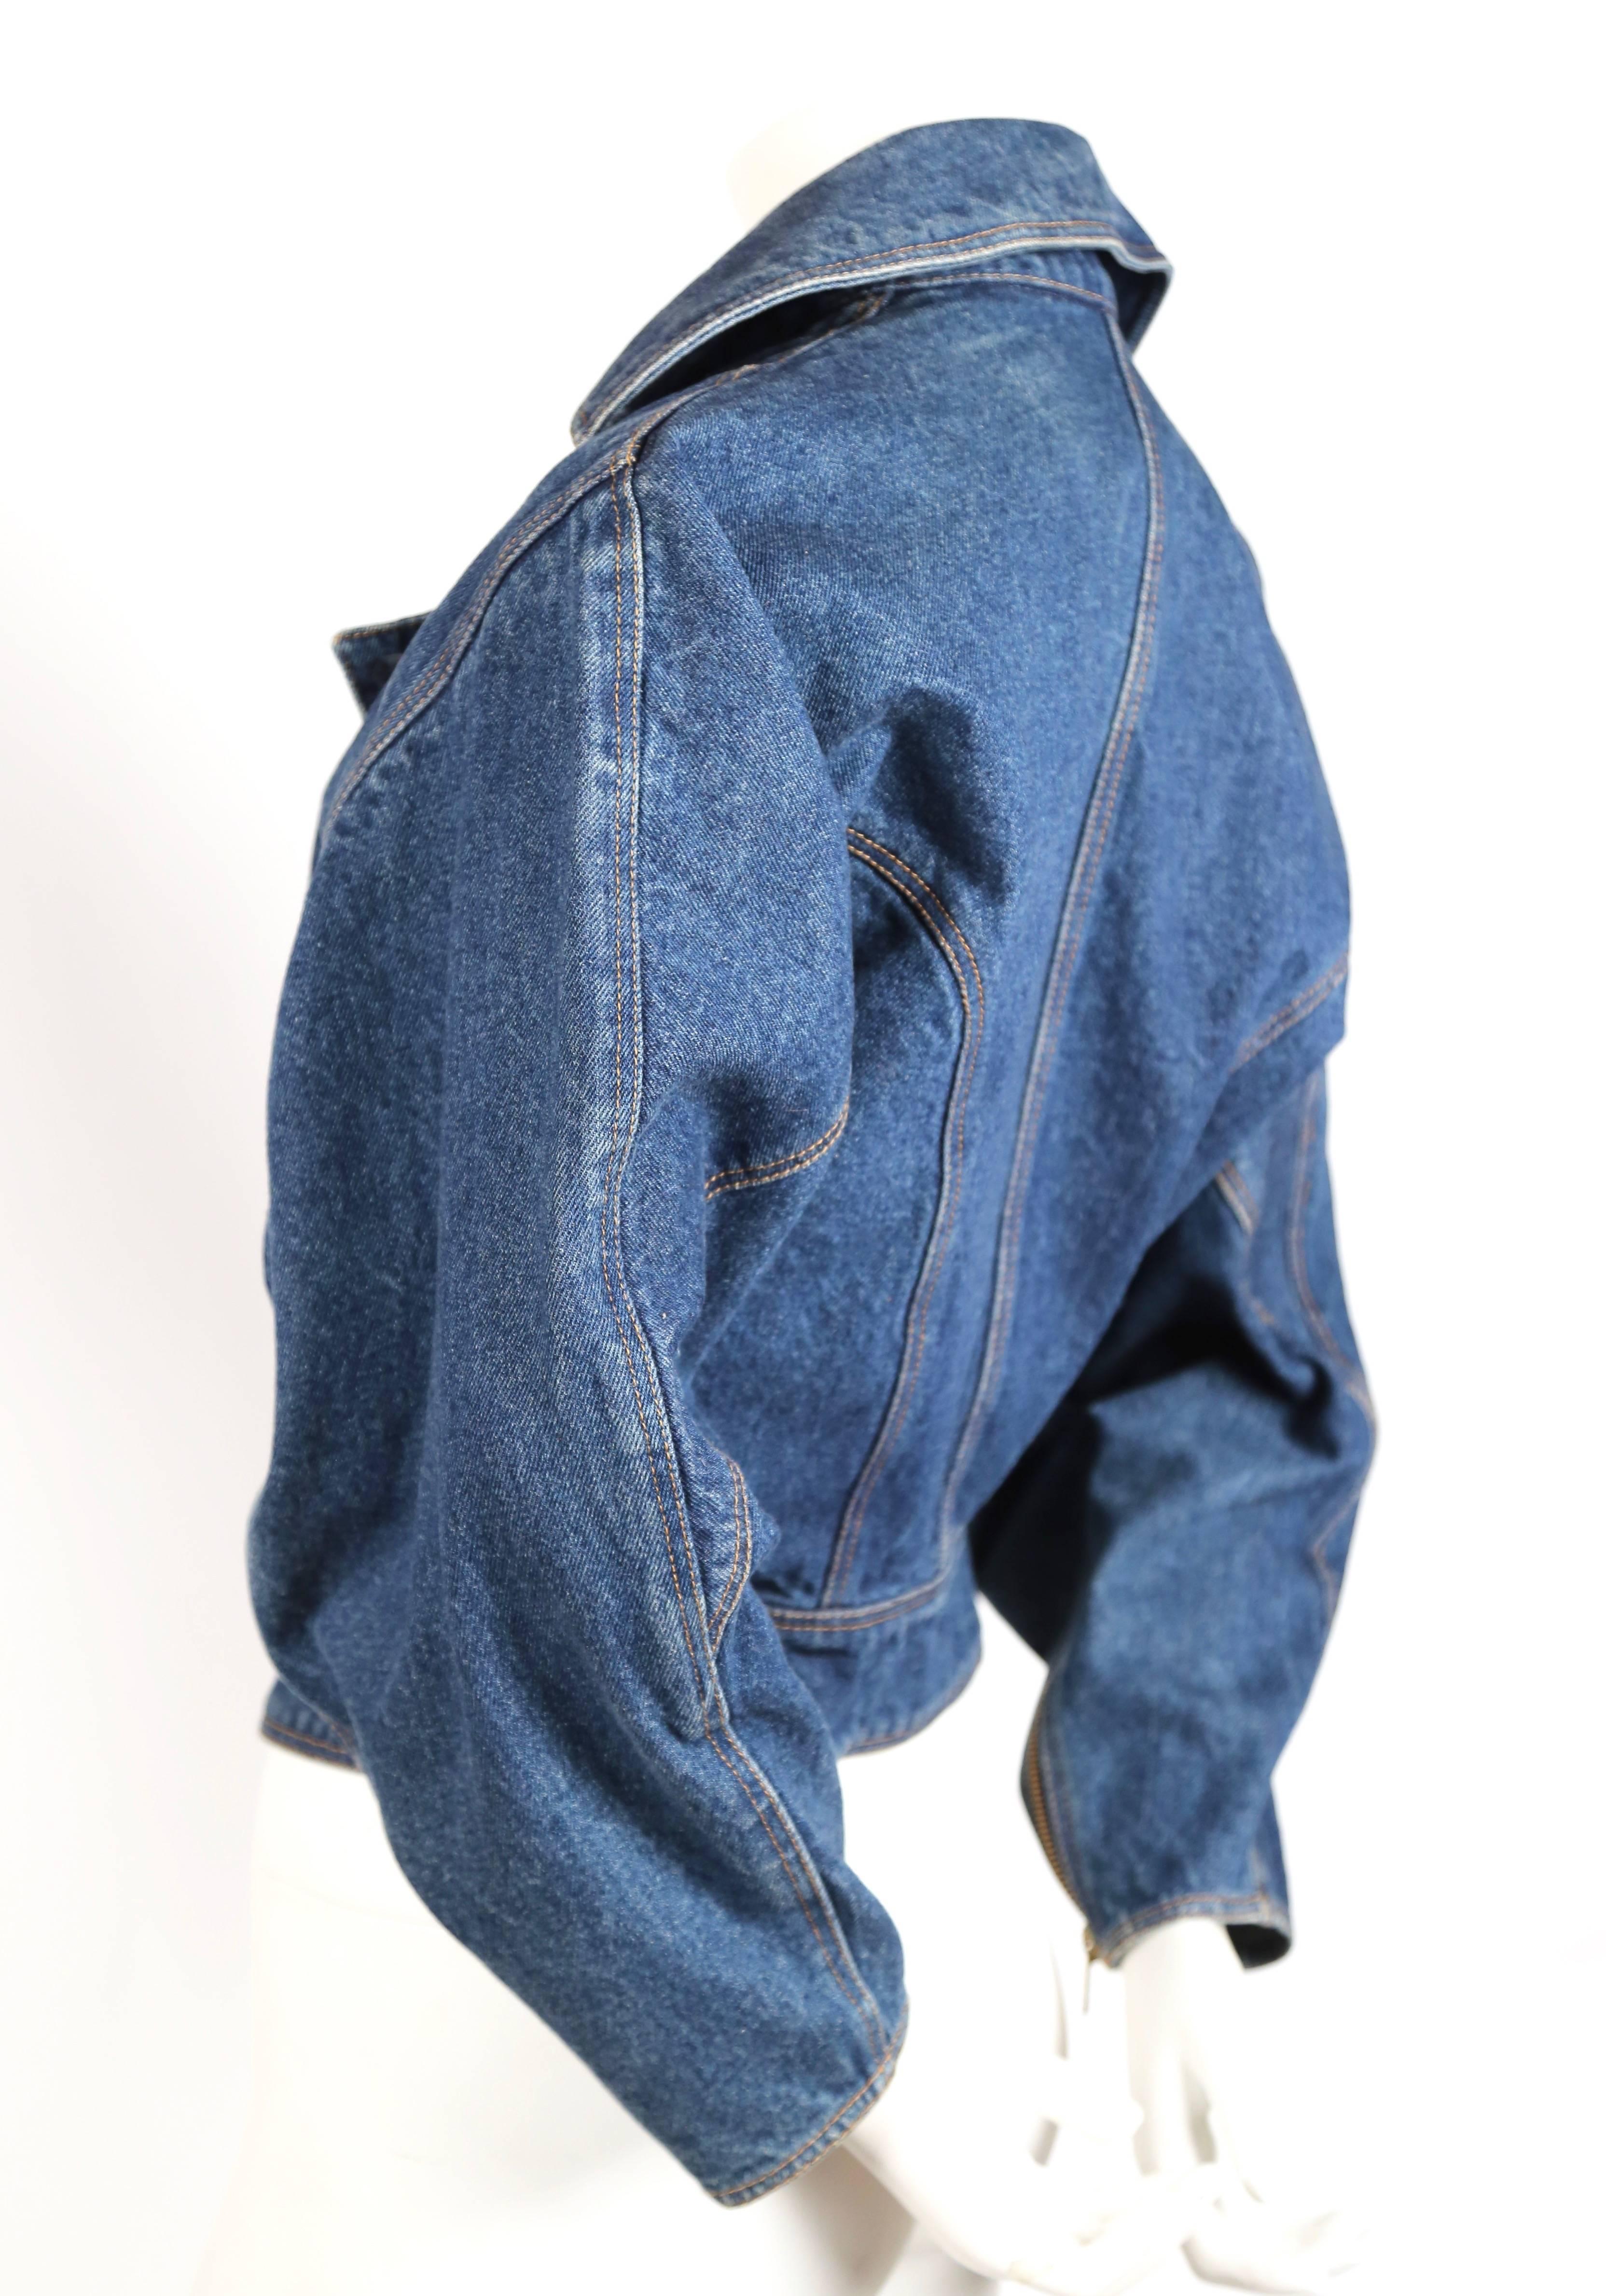 Documented denim jacket with brass zip closures from Azzedine Alaia dating to 1985. Labeled a French size 38". Approximate measurements: drop shoulder 18-18.5", waist 26-26.5", arm length from shoulder seam to cuff 20.5" and